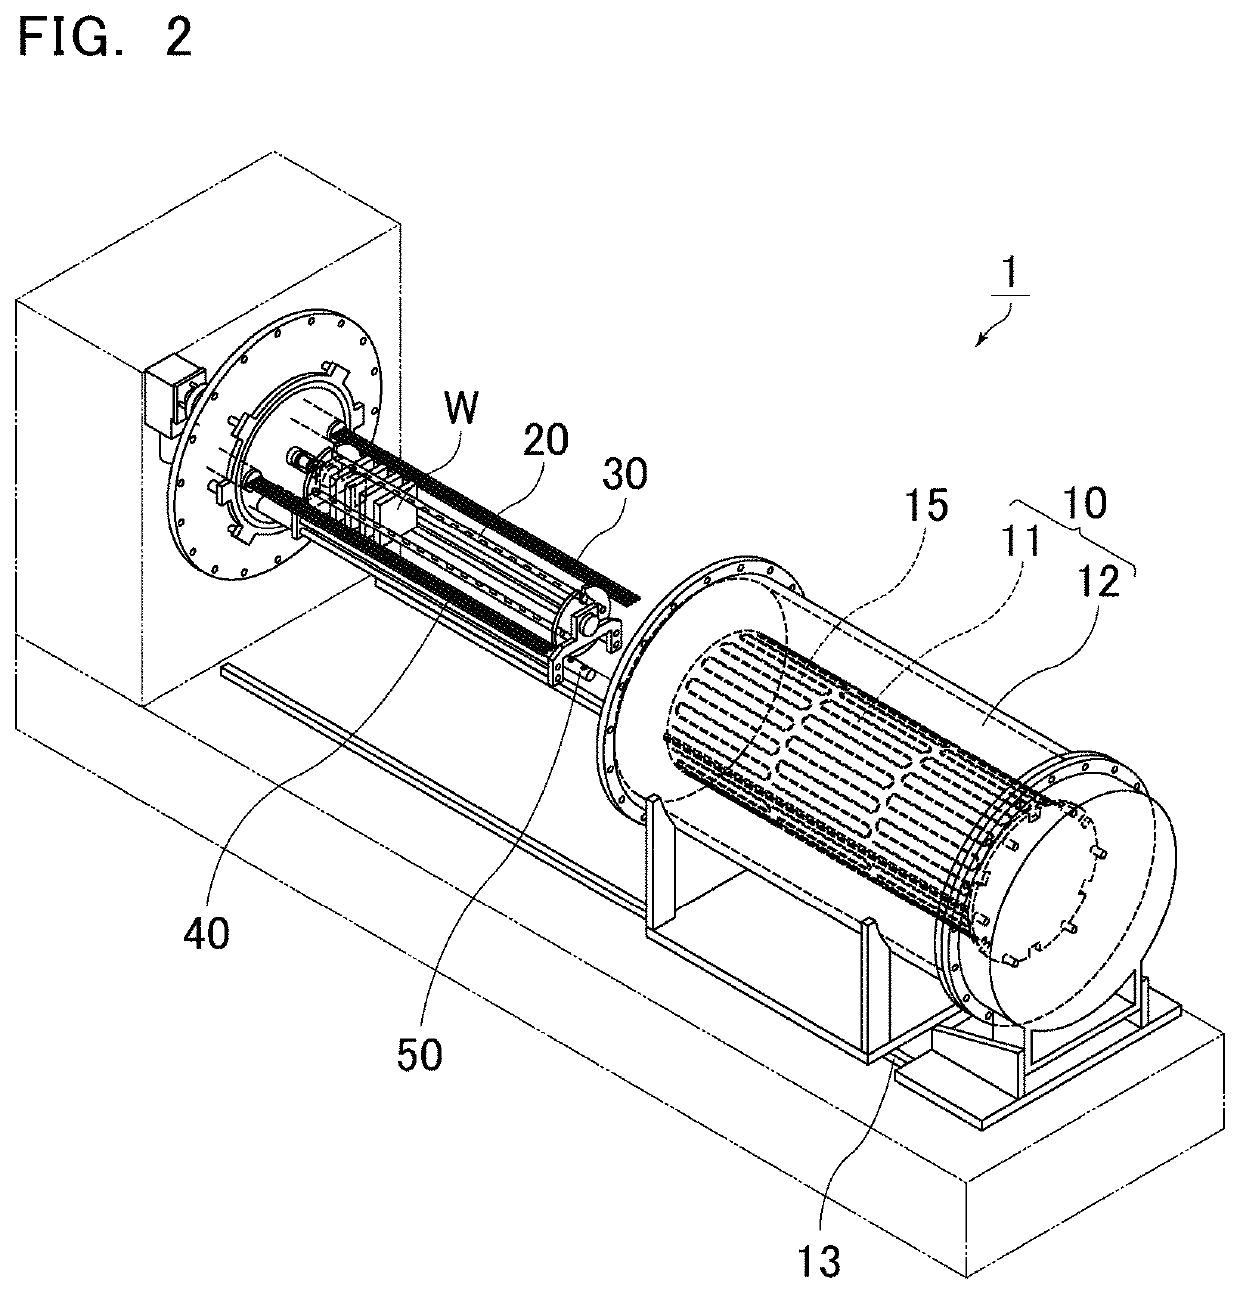 Film-forming device